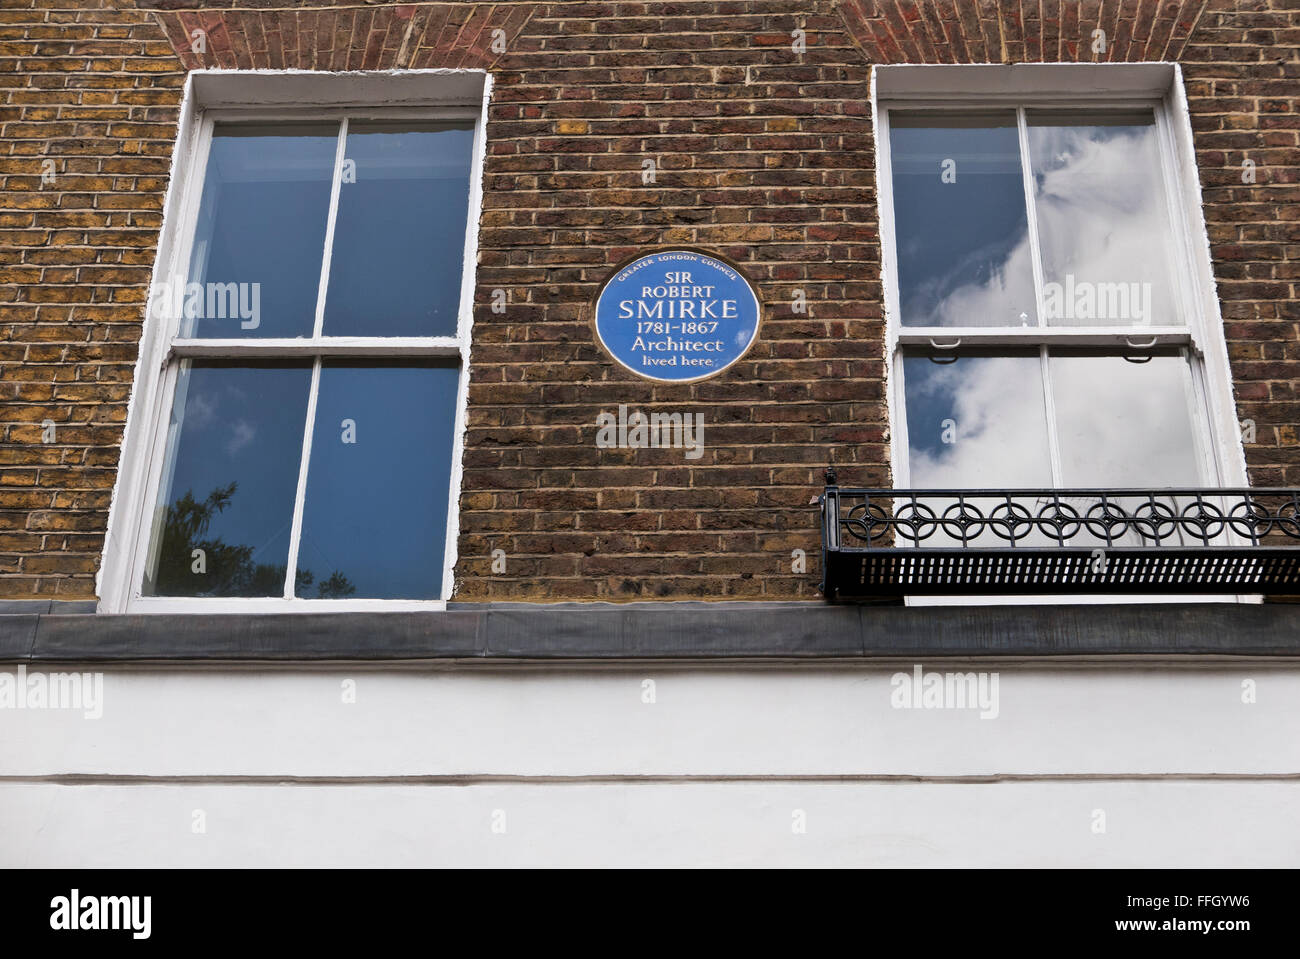 A commemorative blue plaque for Sir Robert Smirke (1 October 1780 – 18 April 1867) on display on a wall in London, UK. Stock Photo